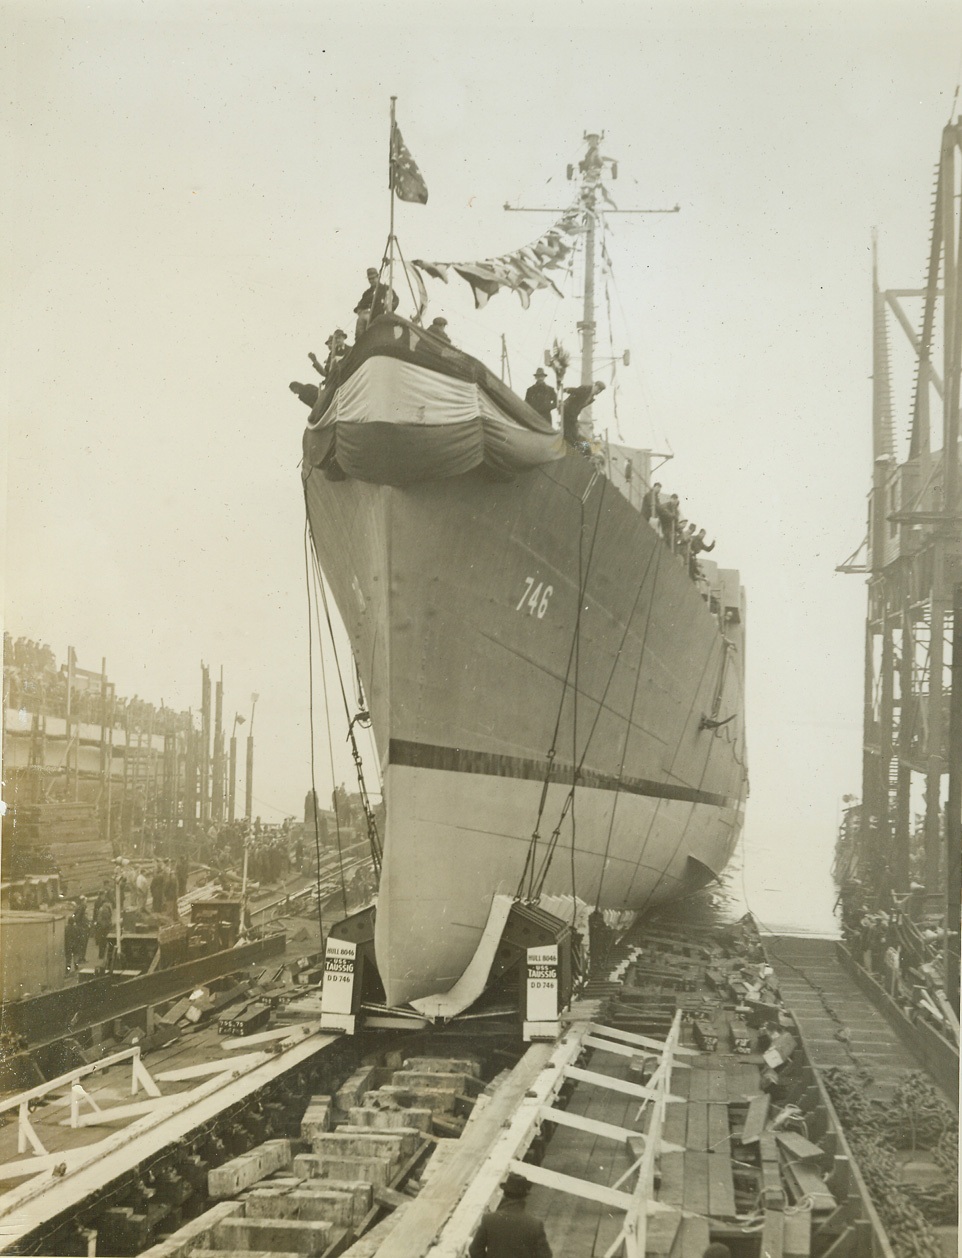 Destroyer Taussig Launched, 1/25/1944. STATEN ISLAND, N.Y. – The 2,200-ton super destroyer U.S.S. Taussig, named after the late Rear Admiral Edward David Taussig, whose heirs have also made naval history, slides down the ways at the Staten Island yard of the Bethlehem Shipbuilding Corp. With the striking power of a World War one cruiser, the U.S.S. Taussig has been designed largely for action in the Pacific as a “Jap-buster”. Credit: (ACME);